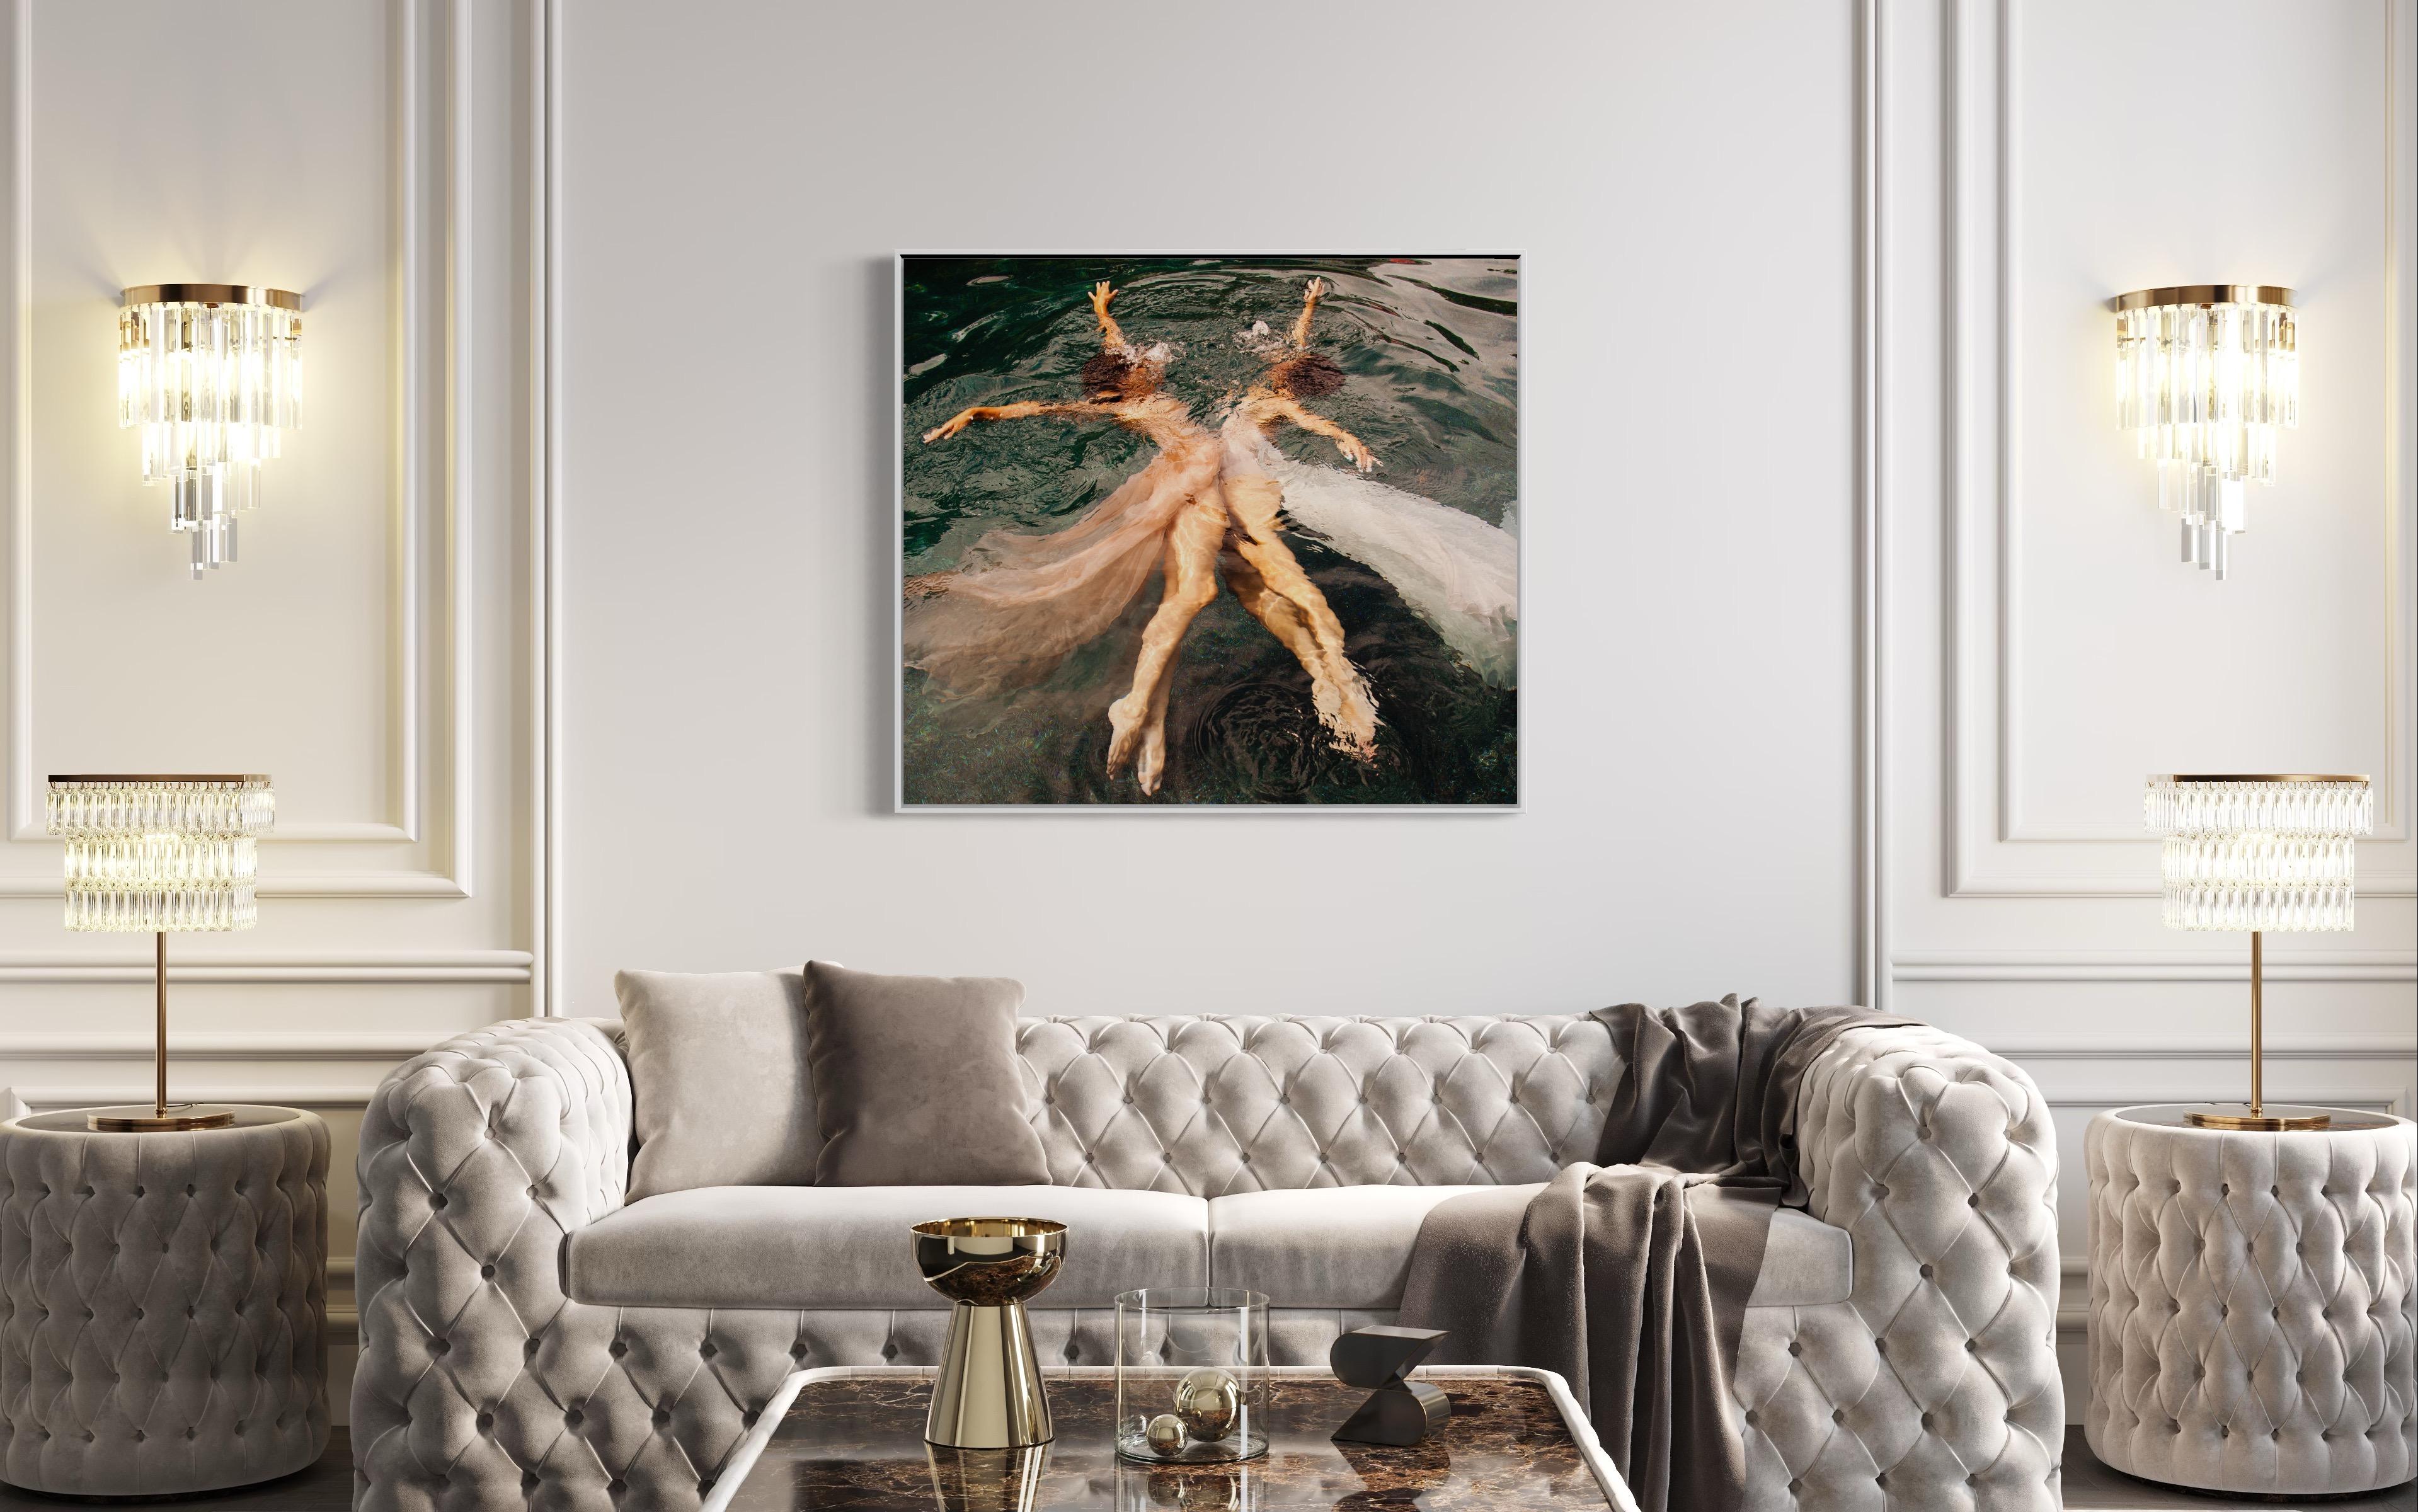 This contemporary figural limited edition photograph by Alyssa Fortin features a view from above the surface of water, with two female figures posed in dancer-like poses. Facing one another, they extend their arms and legs with blush and white